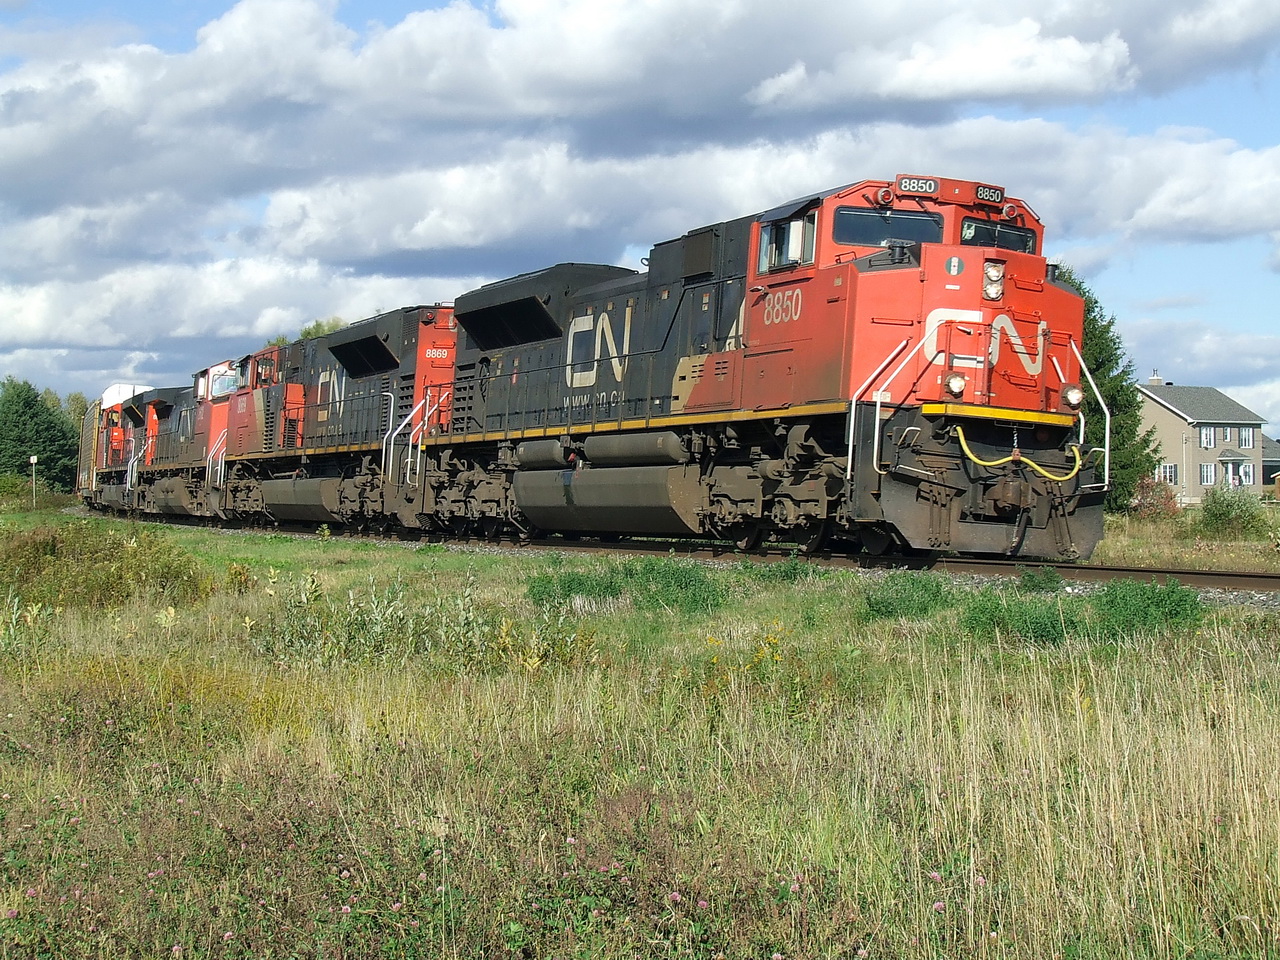 CN 309 is a mix today and will become 373 at Taschereau yard,the 2 last trailing units are 2612 8956.